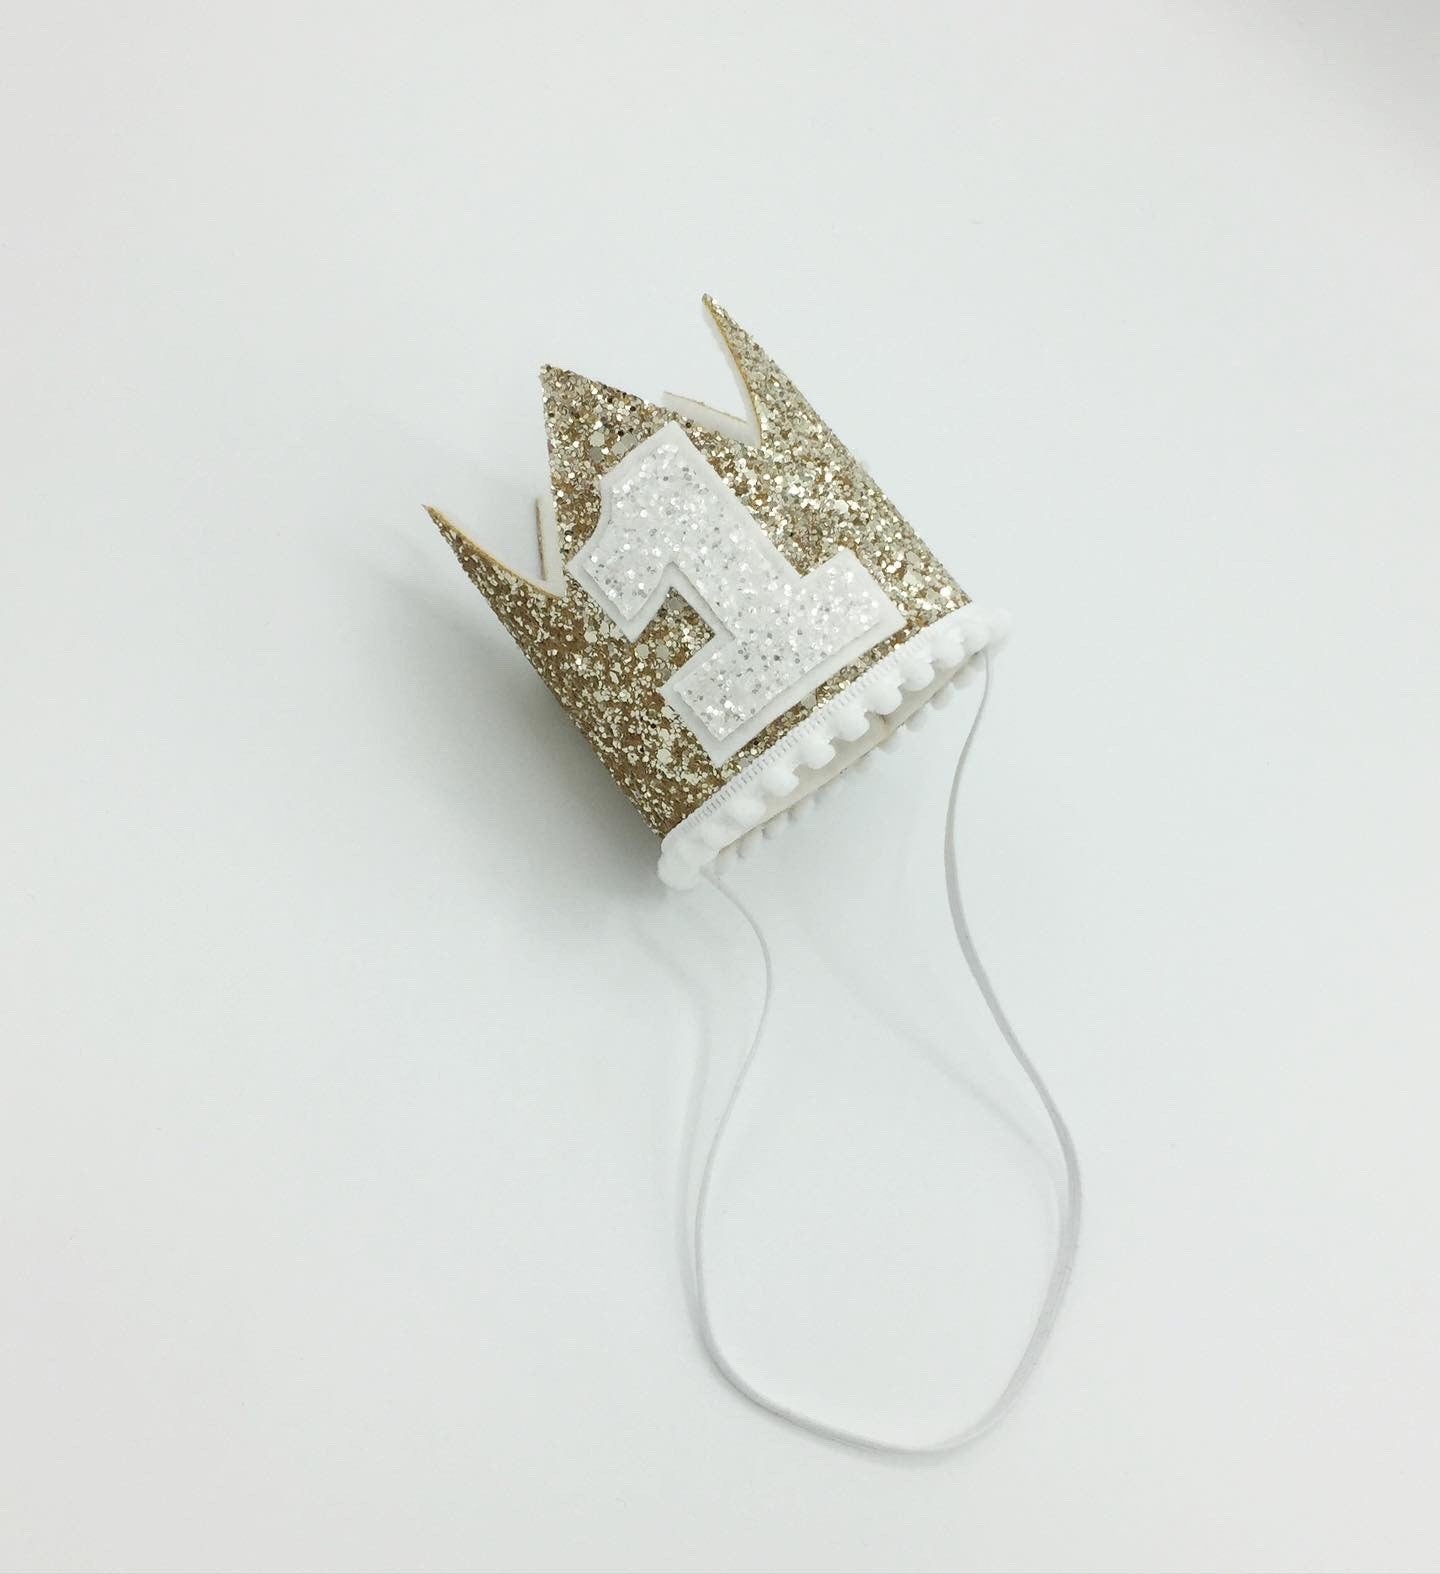 Gold and white crown